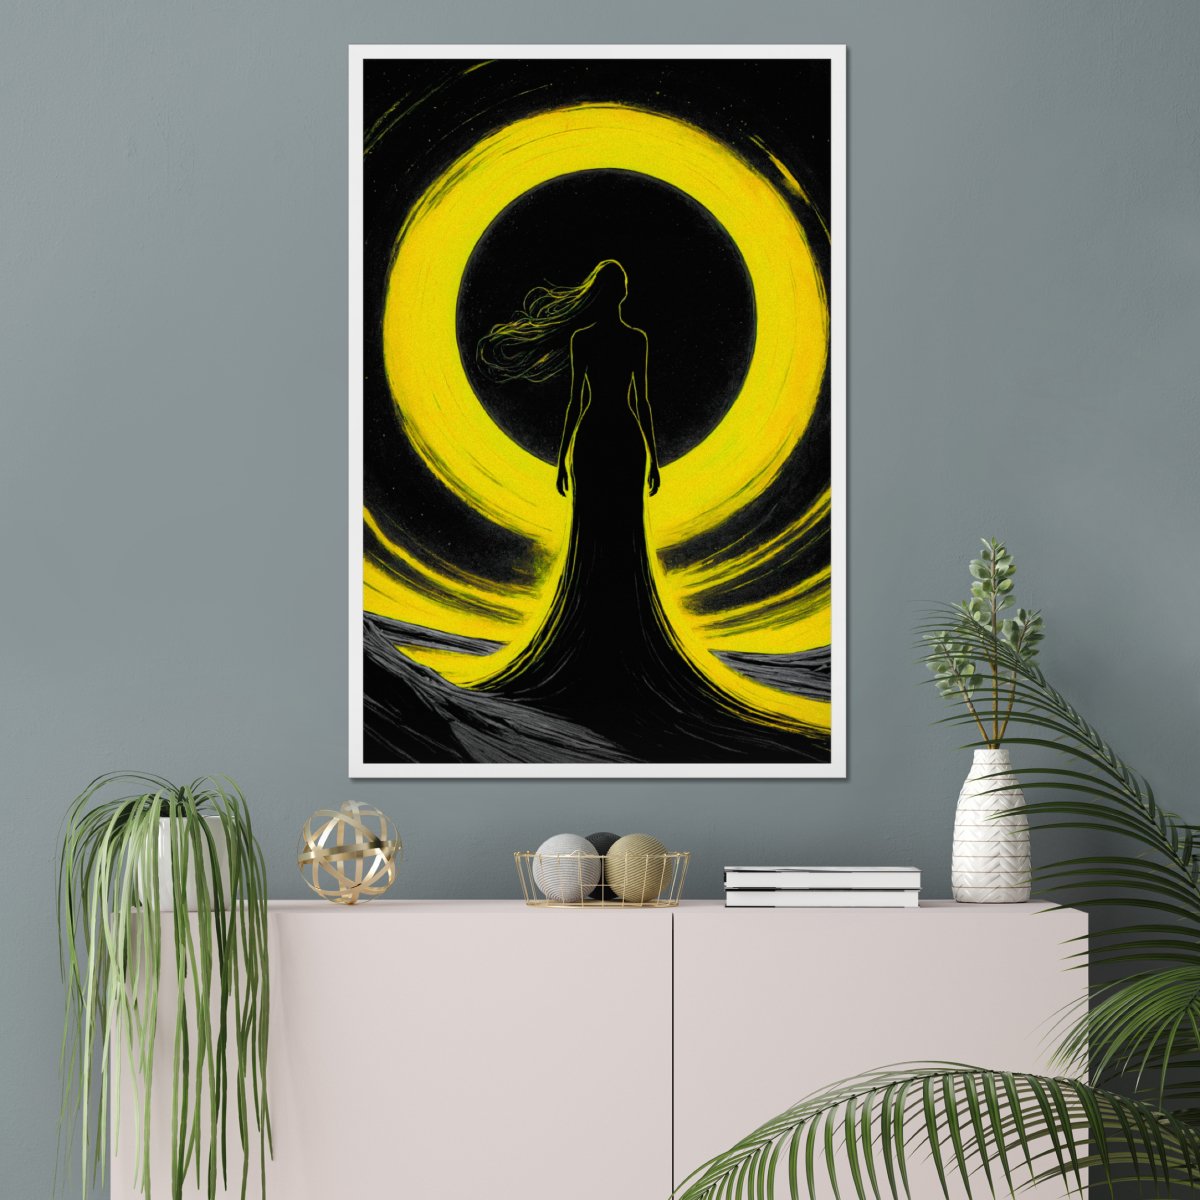 Golden eclipse - Art print - Poster - Ever colorful